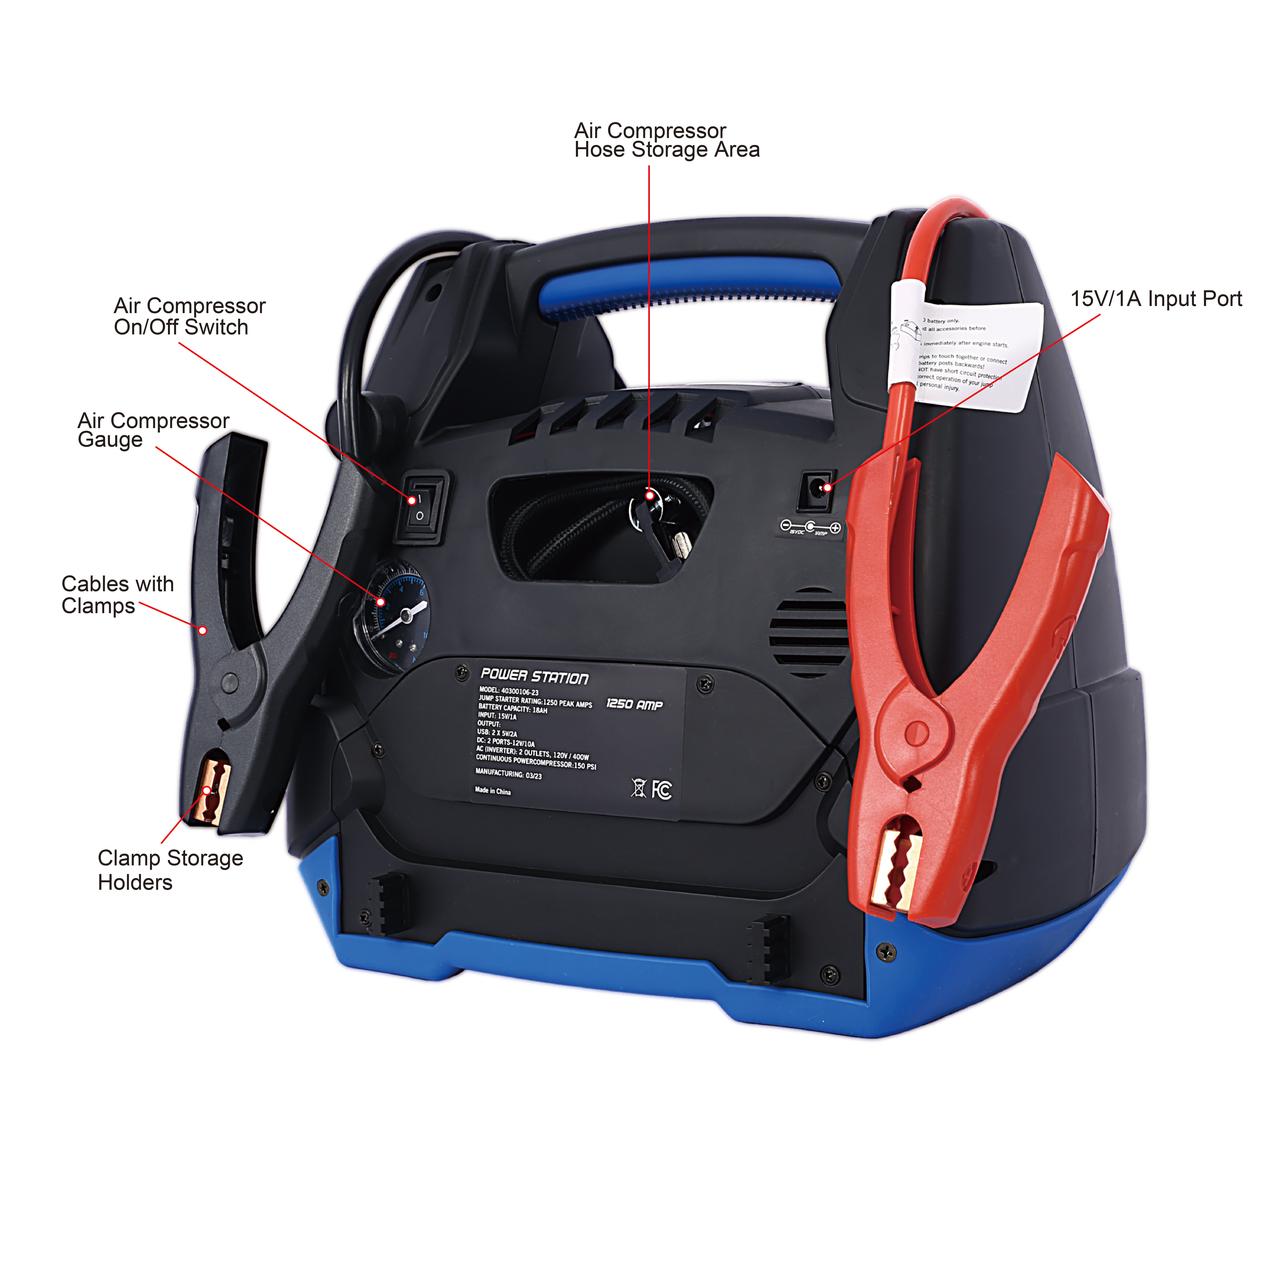 iRerts 1800 Peak Amp Jump Starter, Rechargeable Jump Starter for Gas Diesel Vehicles, Portable Power Station Powerhouse with Air Compressor, 2 DC Outlets, 2 AC Outlets, and 2 USB Ports - image 3 of 10